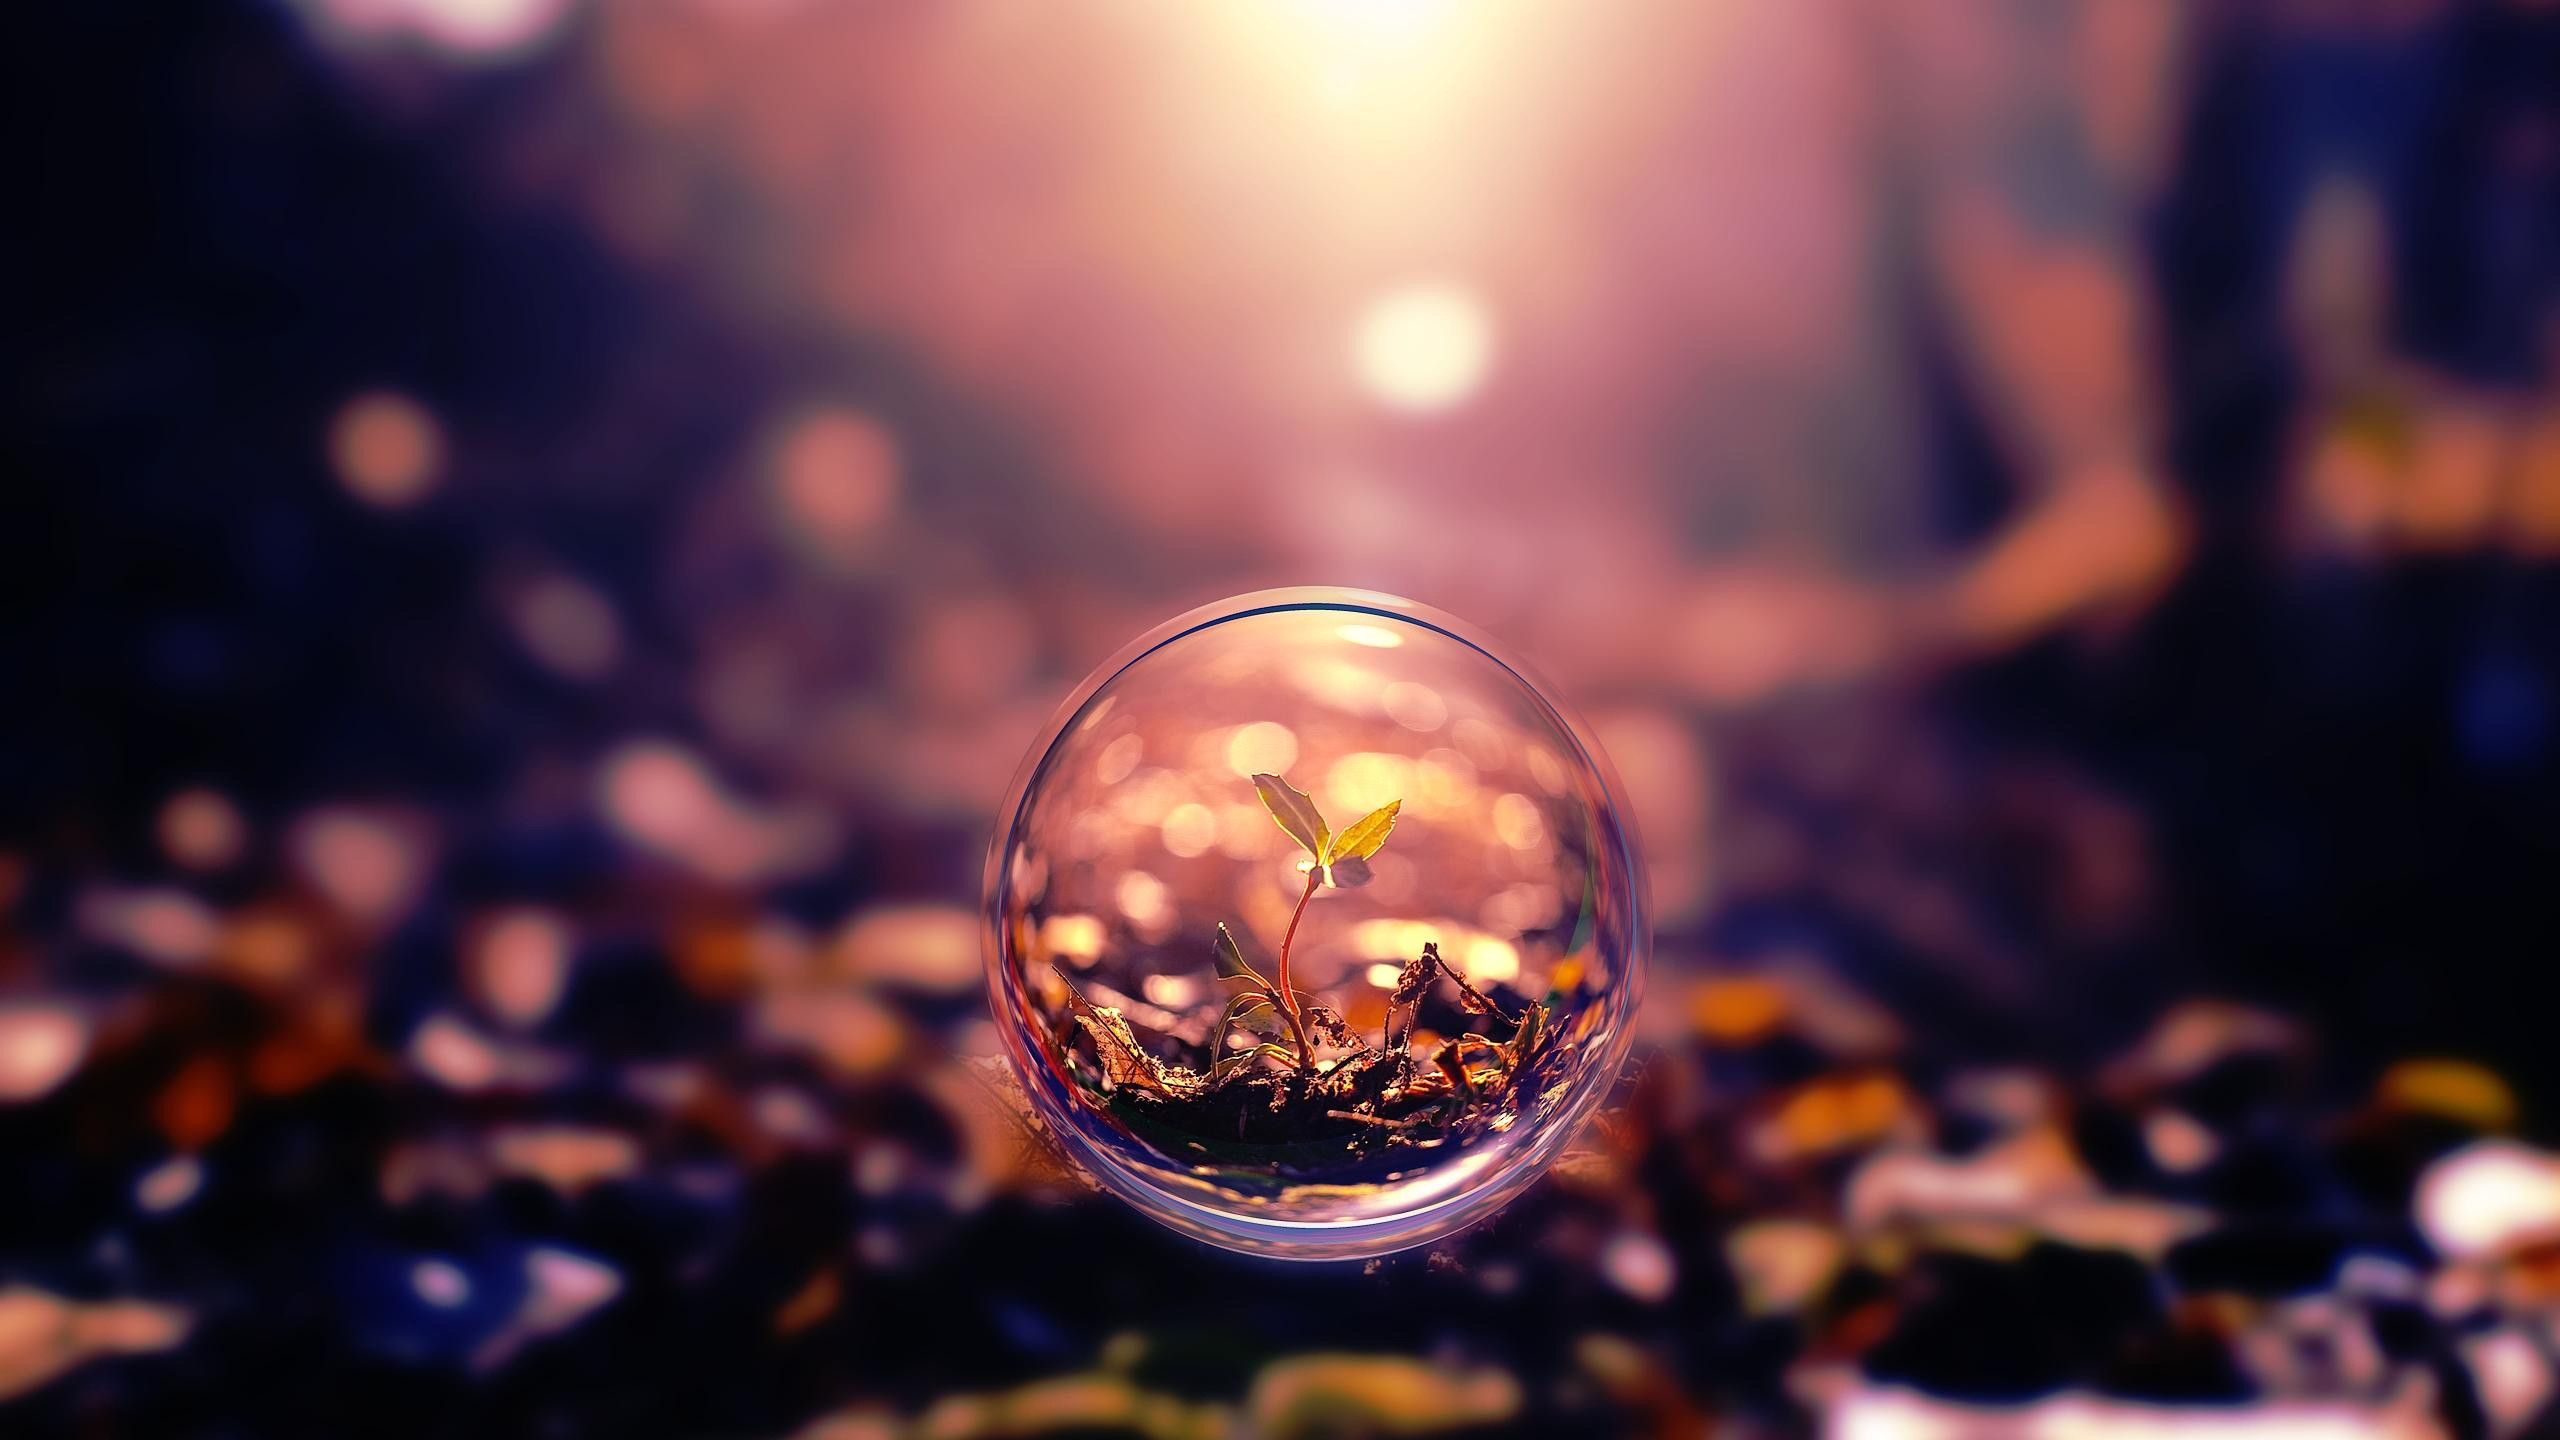 Wallpaper sphere, 4k, HD wallpaper, background, sunset, transparent, plant,  Abstract #245 - Page 5